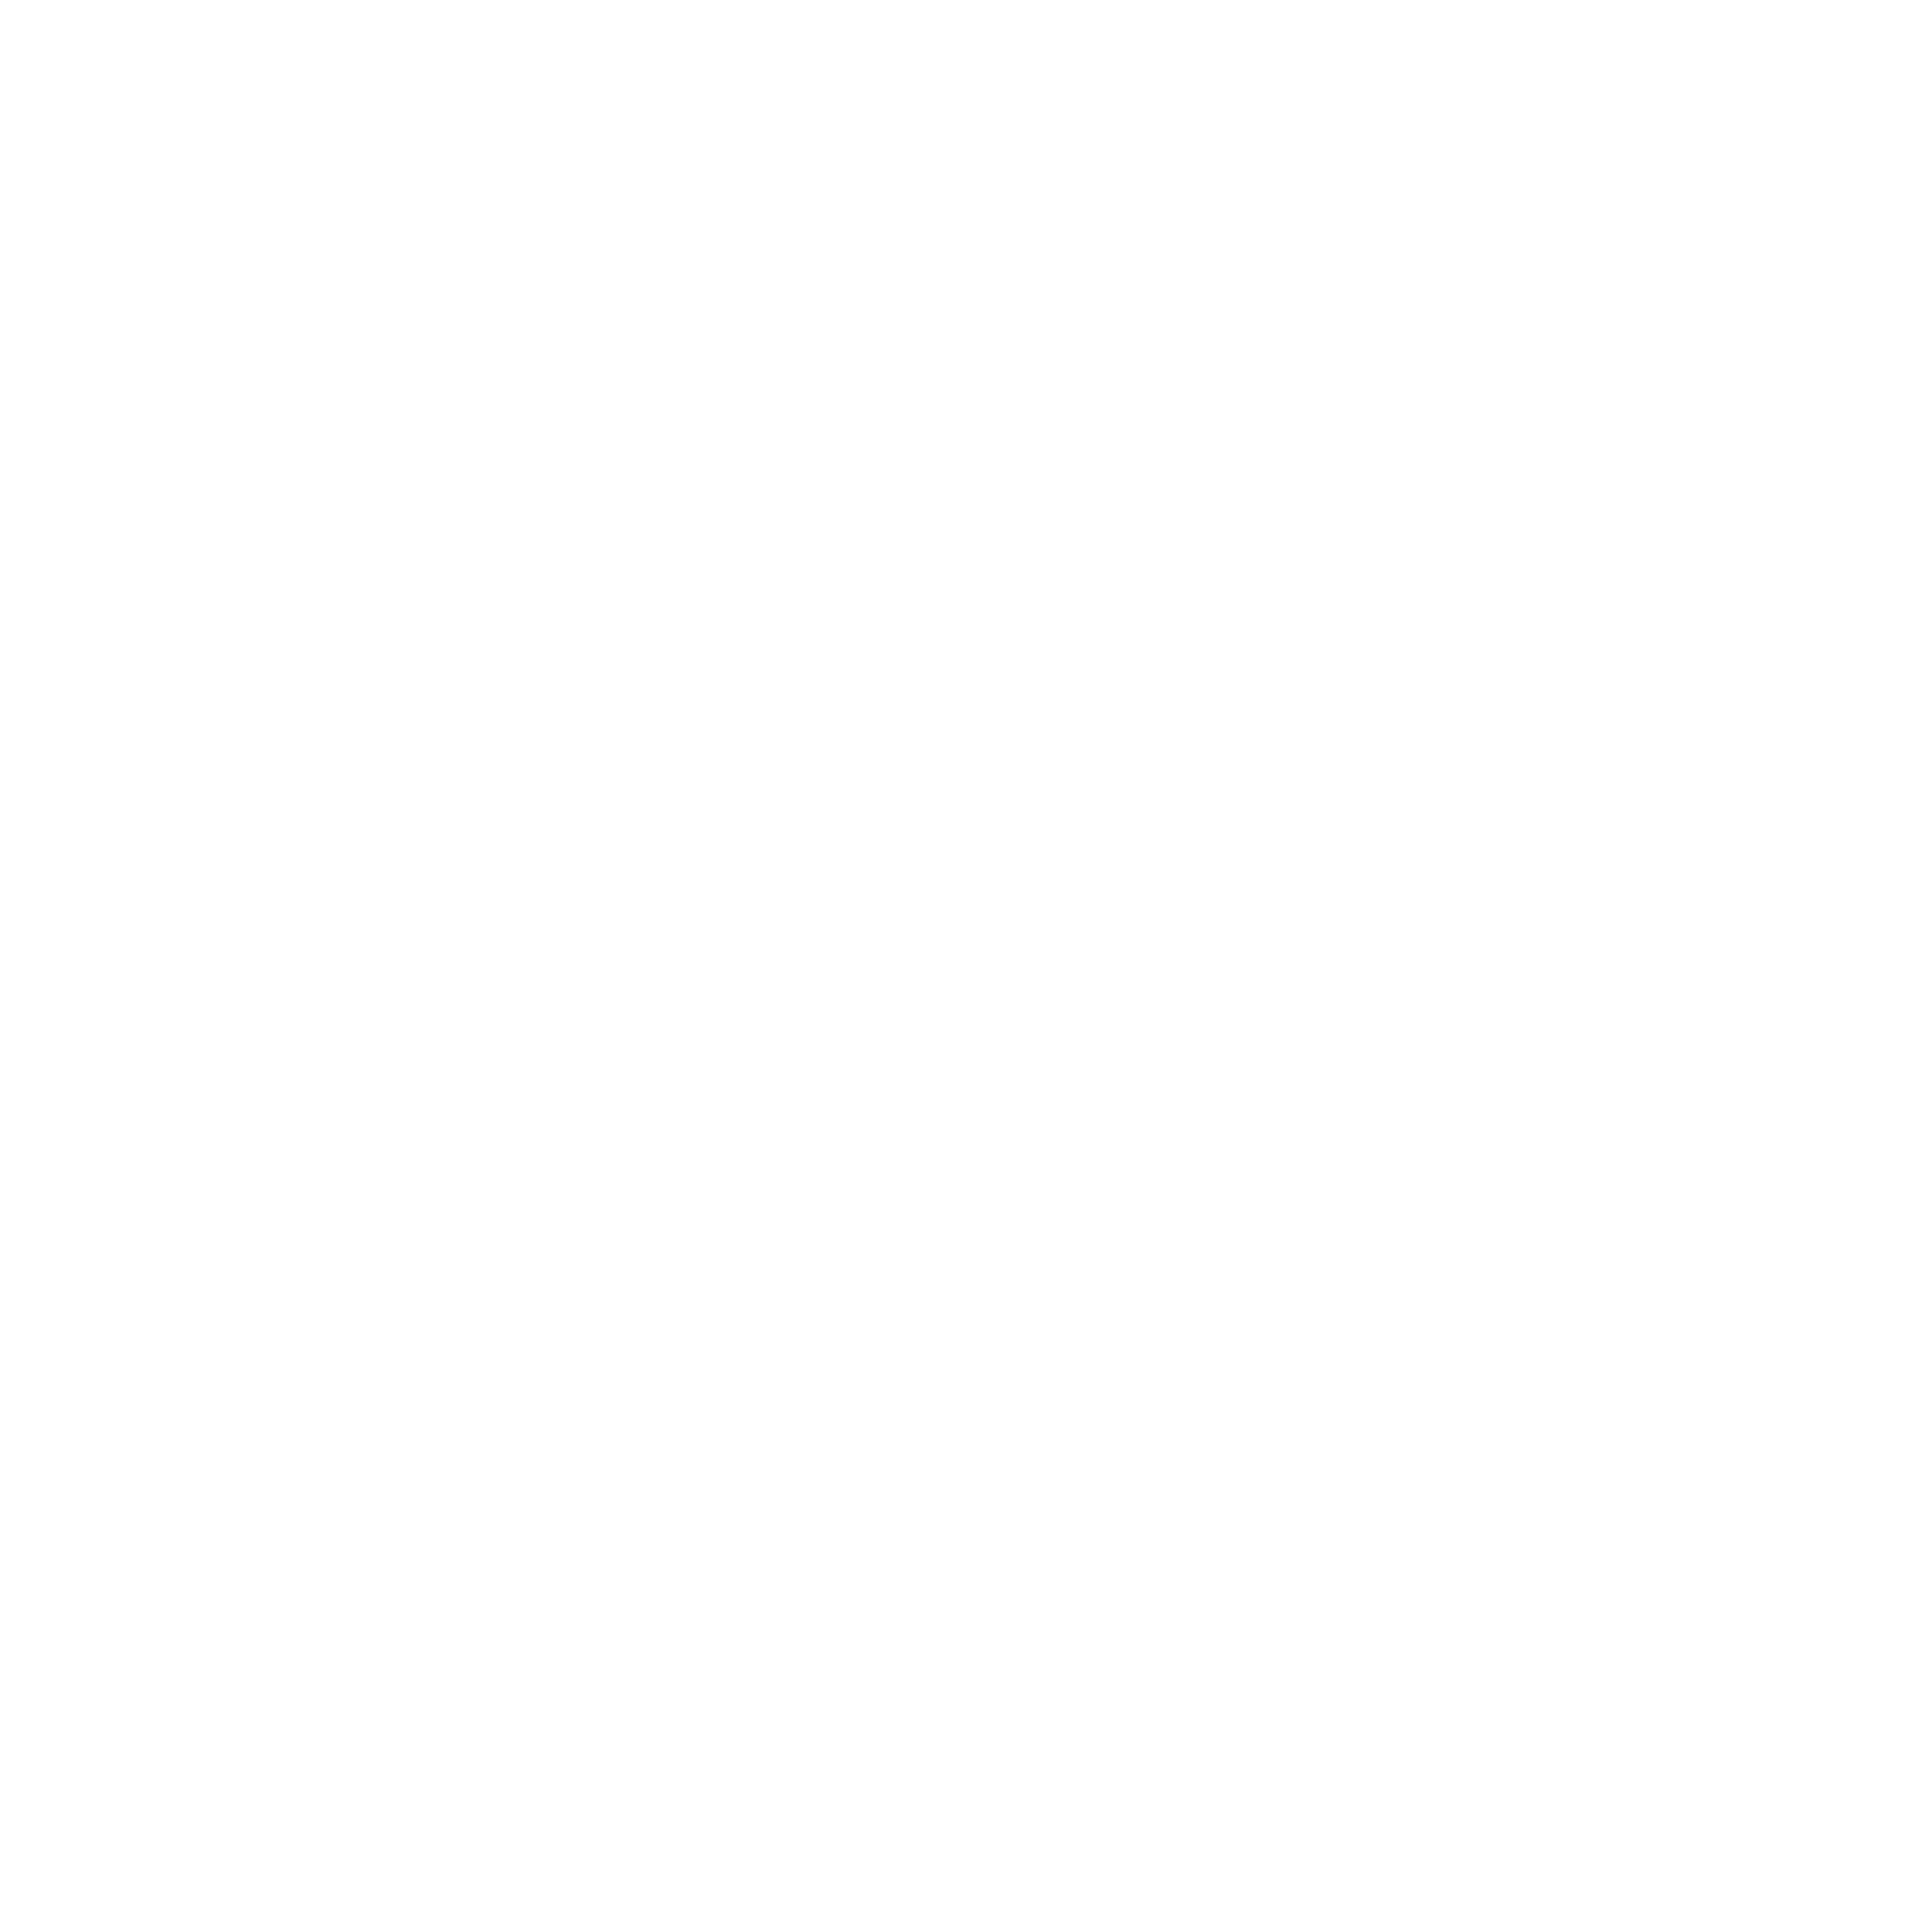 The 5th Conference on MarTech - Engineered by GrowthAgent - Novermber 21 Antwerp Belgium